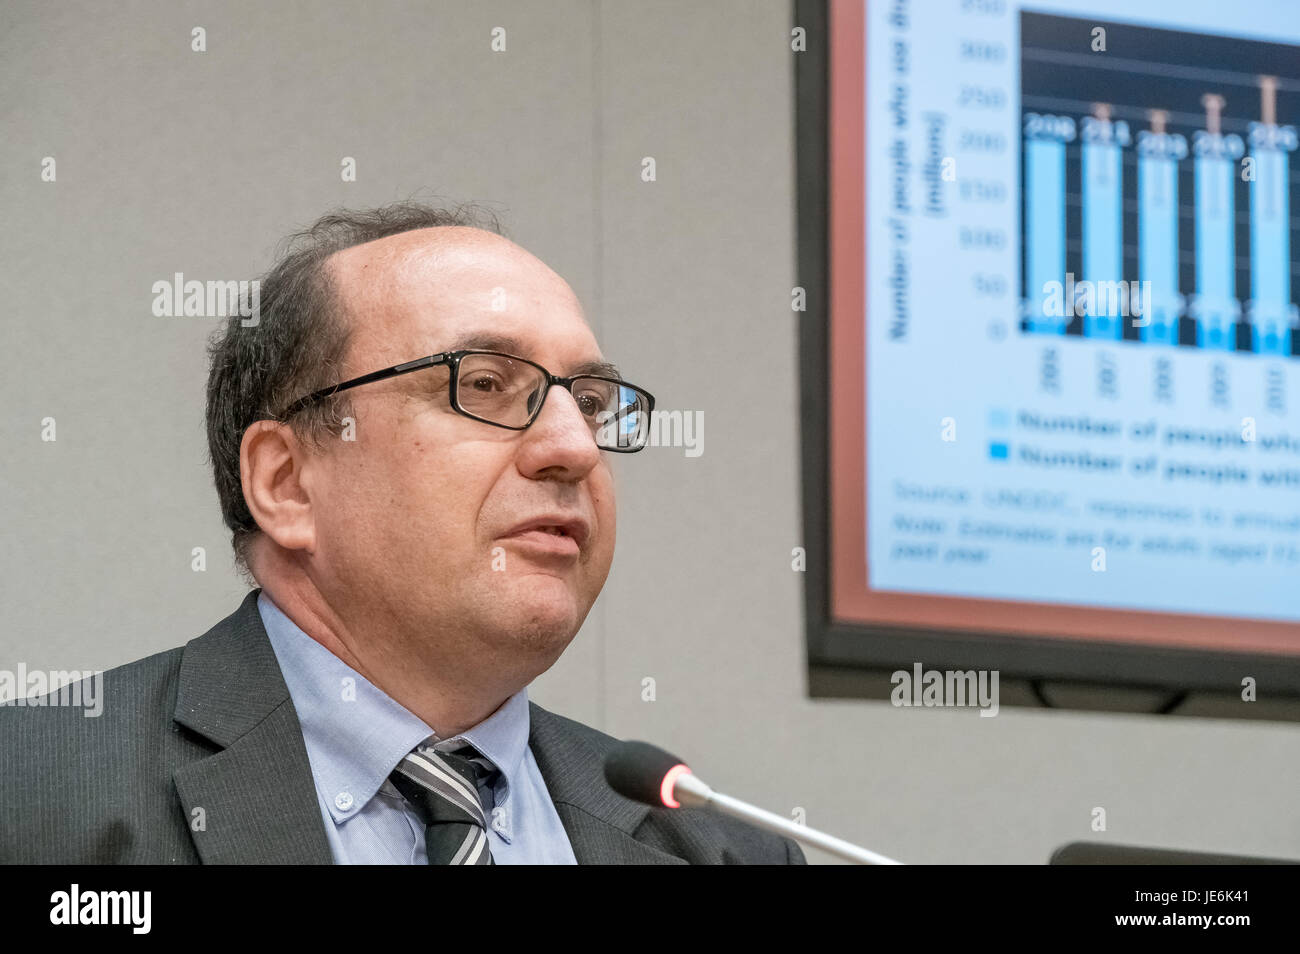 New York, United States. 22nd June, 2017. UNODC Research Officer Dr. Thomas Pietschmann is seen at the press briefing. On the occasion of the launch of the 2017 World Drug Report, United Nations Office on Drugs and Crime (UNODC) Director for Policy Analysis and Public Affairs Jean-Luc Lemahieu and UNODC Research Officer Dr. Thomas Pietschmann held a press briefing at UN Headquarters to detail key findings in the document. Credit: Albin Lohr-Jones/Pacific Press/Alamy Live News Stock Photo